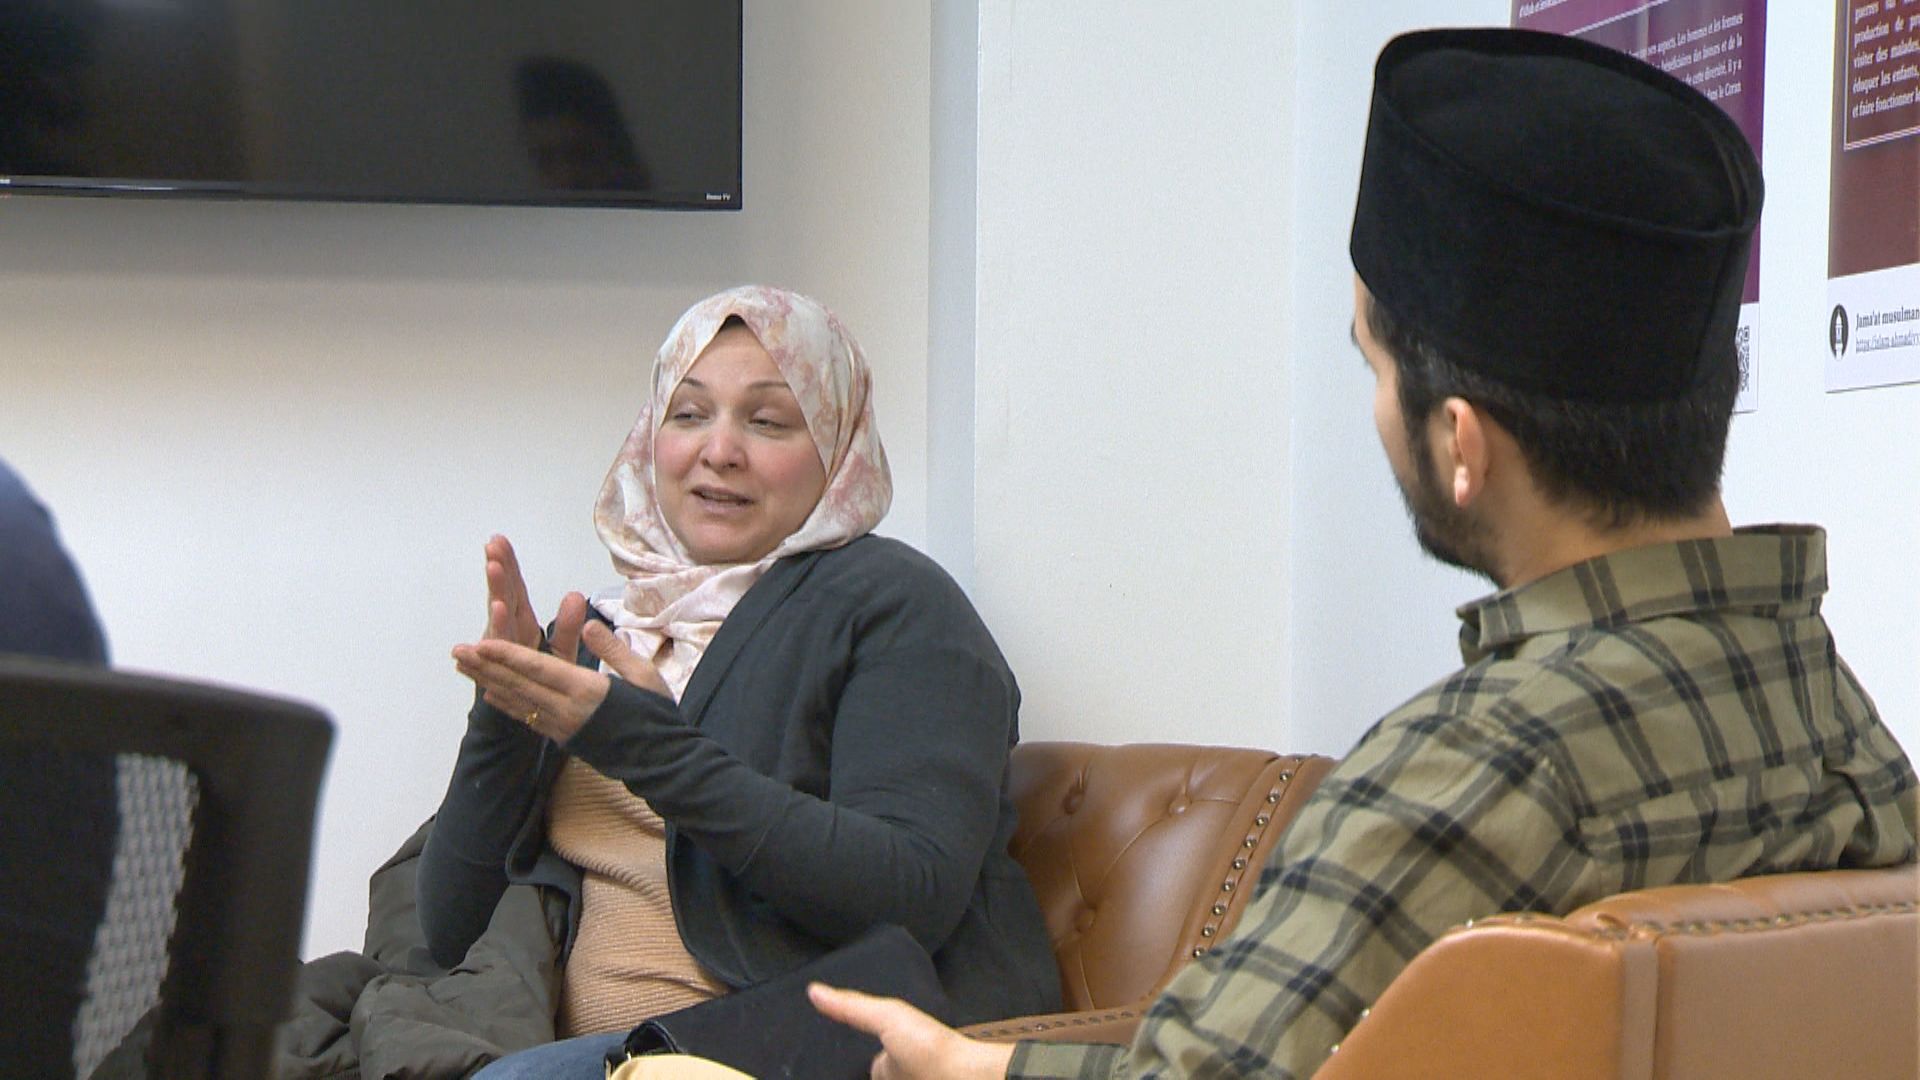 Muslim community in Montreal holds open house to help dispel misconceptions